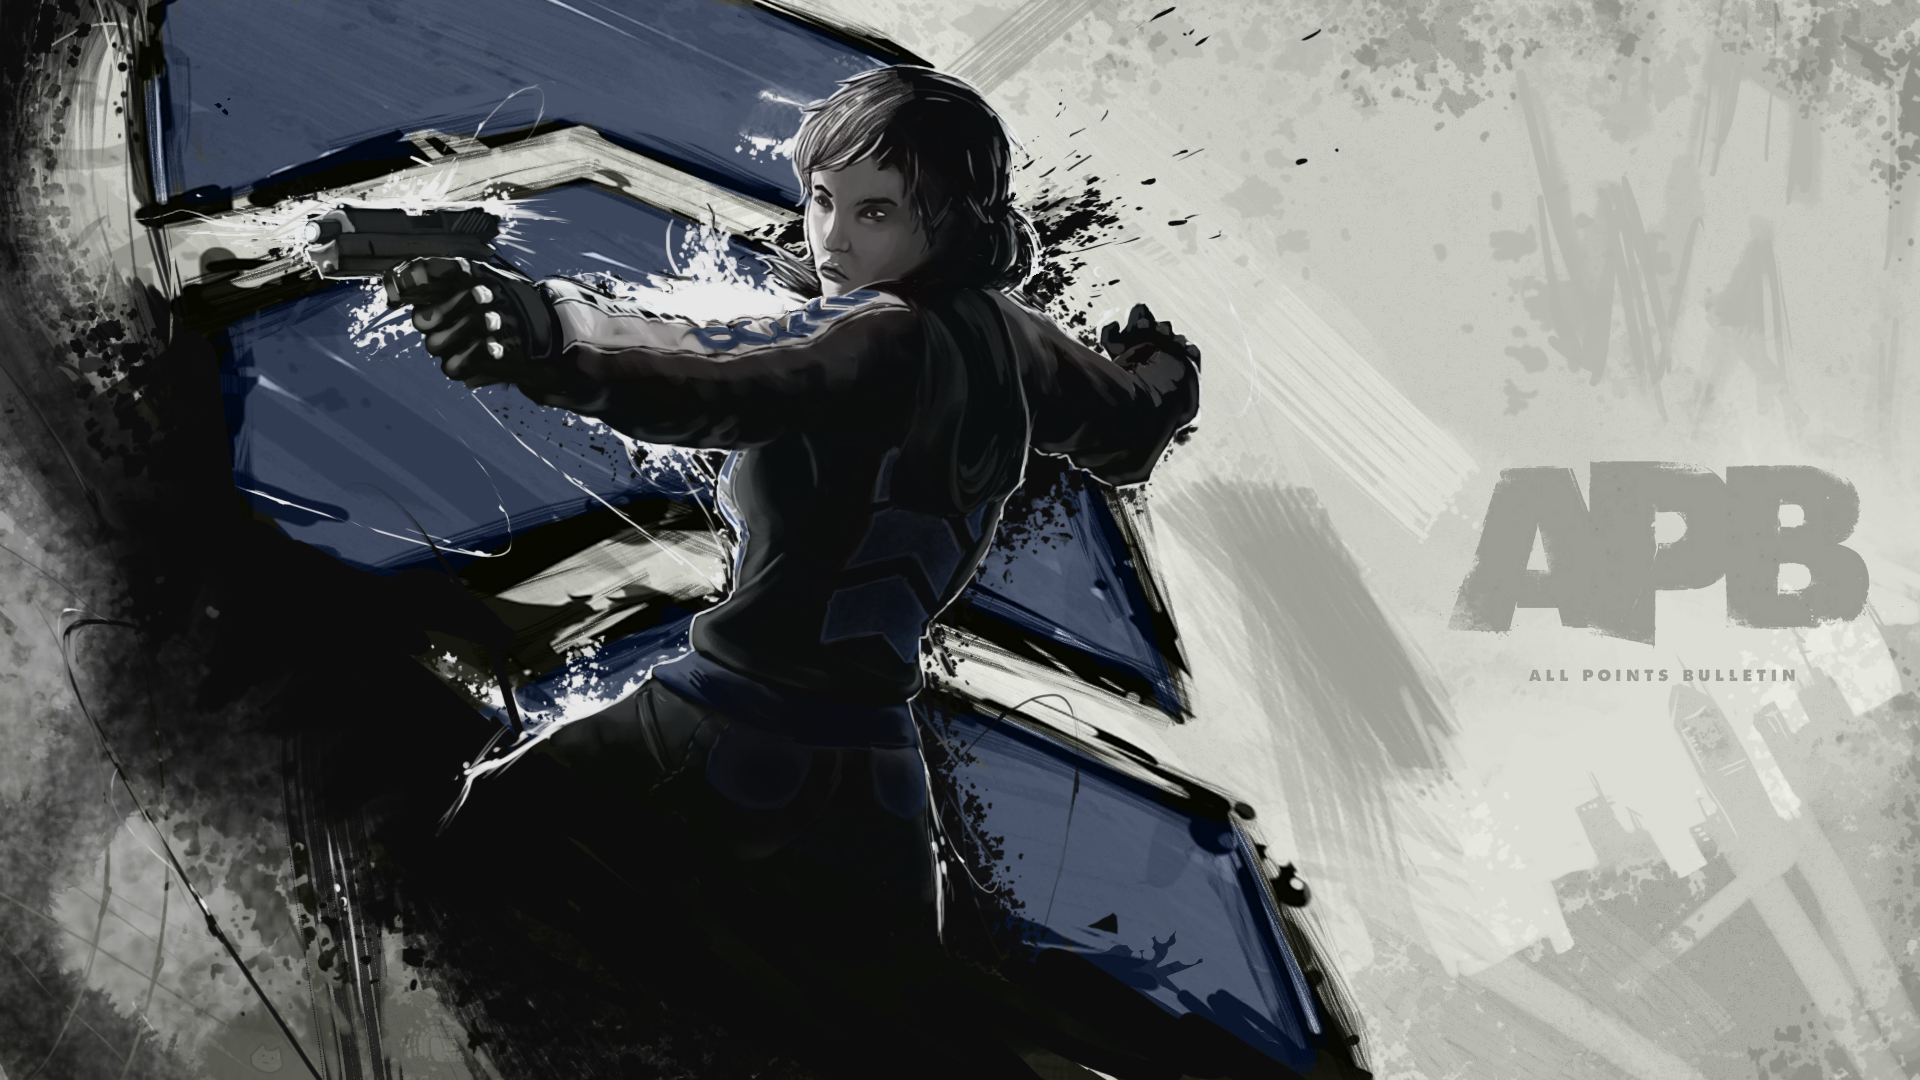 Video Game APB: All Points Bulletin HD Wallpaper | Background Image